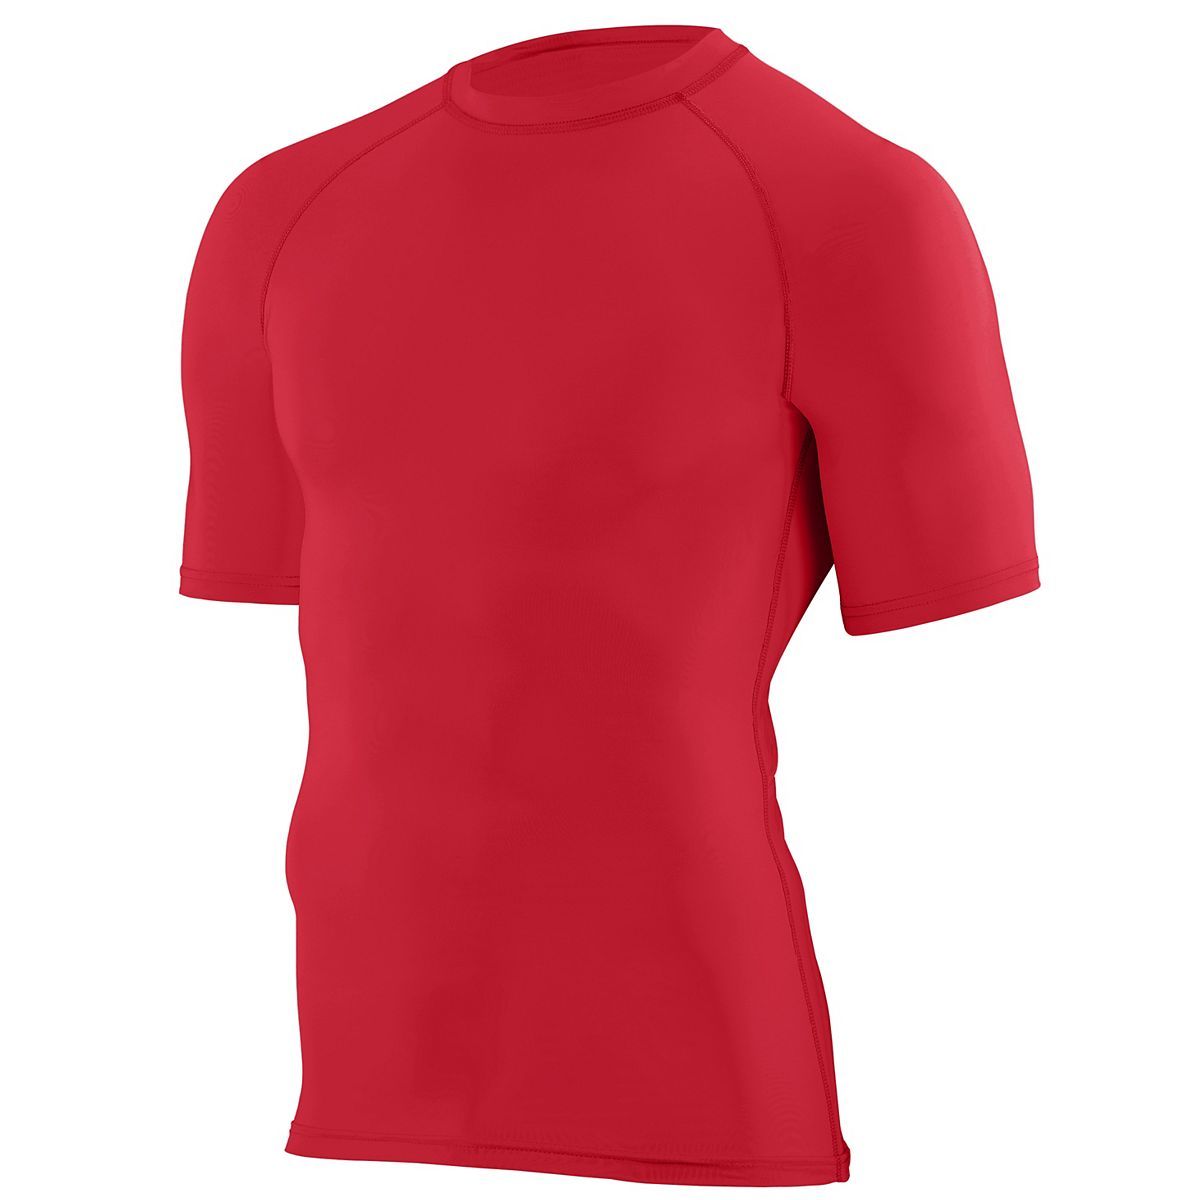 Augusta Sportswear Hyperform Compression Short Sleeve Tee in Red  -Part of the Adult, Adult-Tee-Shirt, T-Shirts, Augusta-Products, Shirts product lines at KanaleyCreations.com